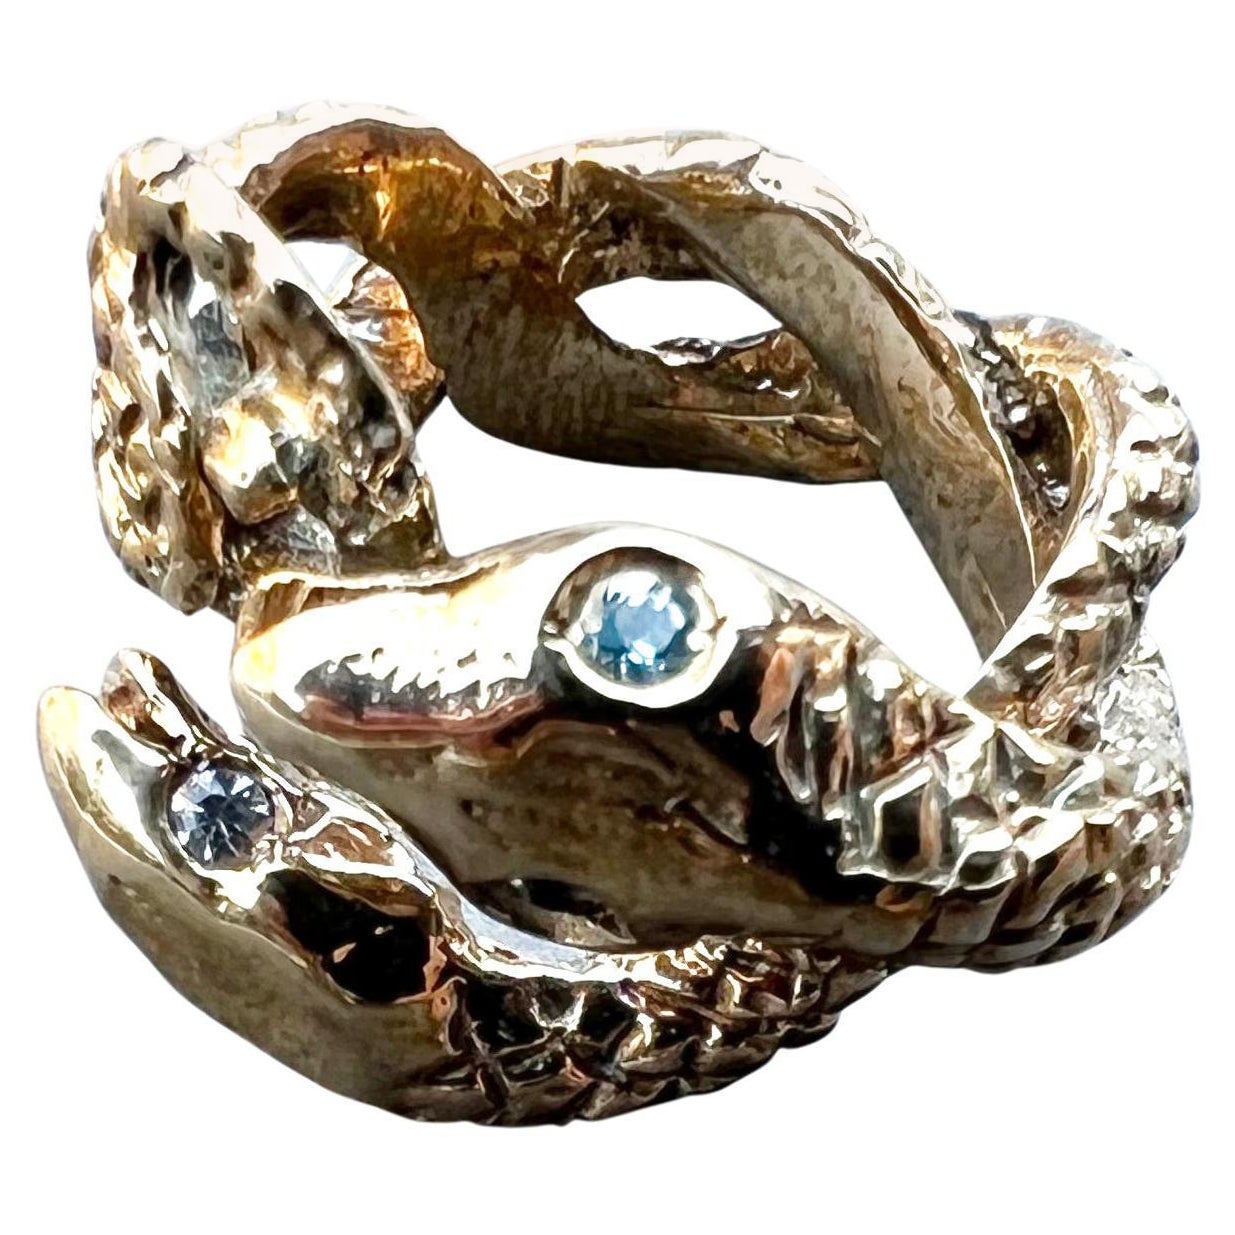 Animal jewelry Aquamarine Snake Ring Bronze Cocktail Ring J Dauphin For Sale